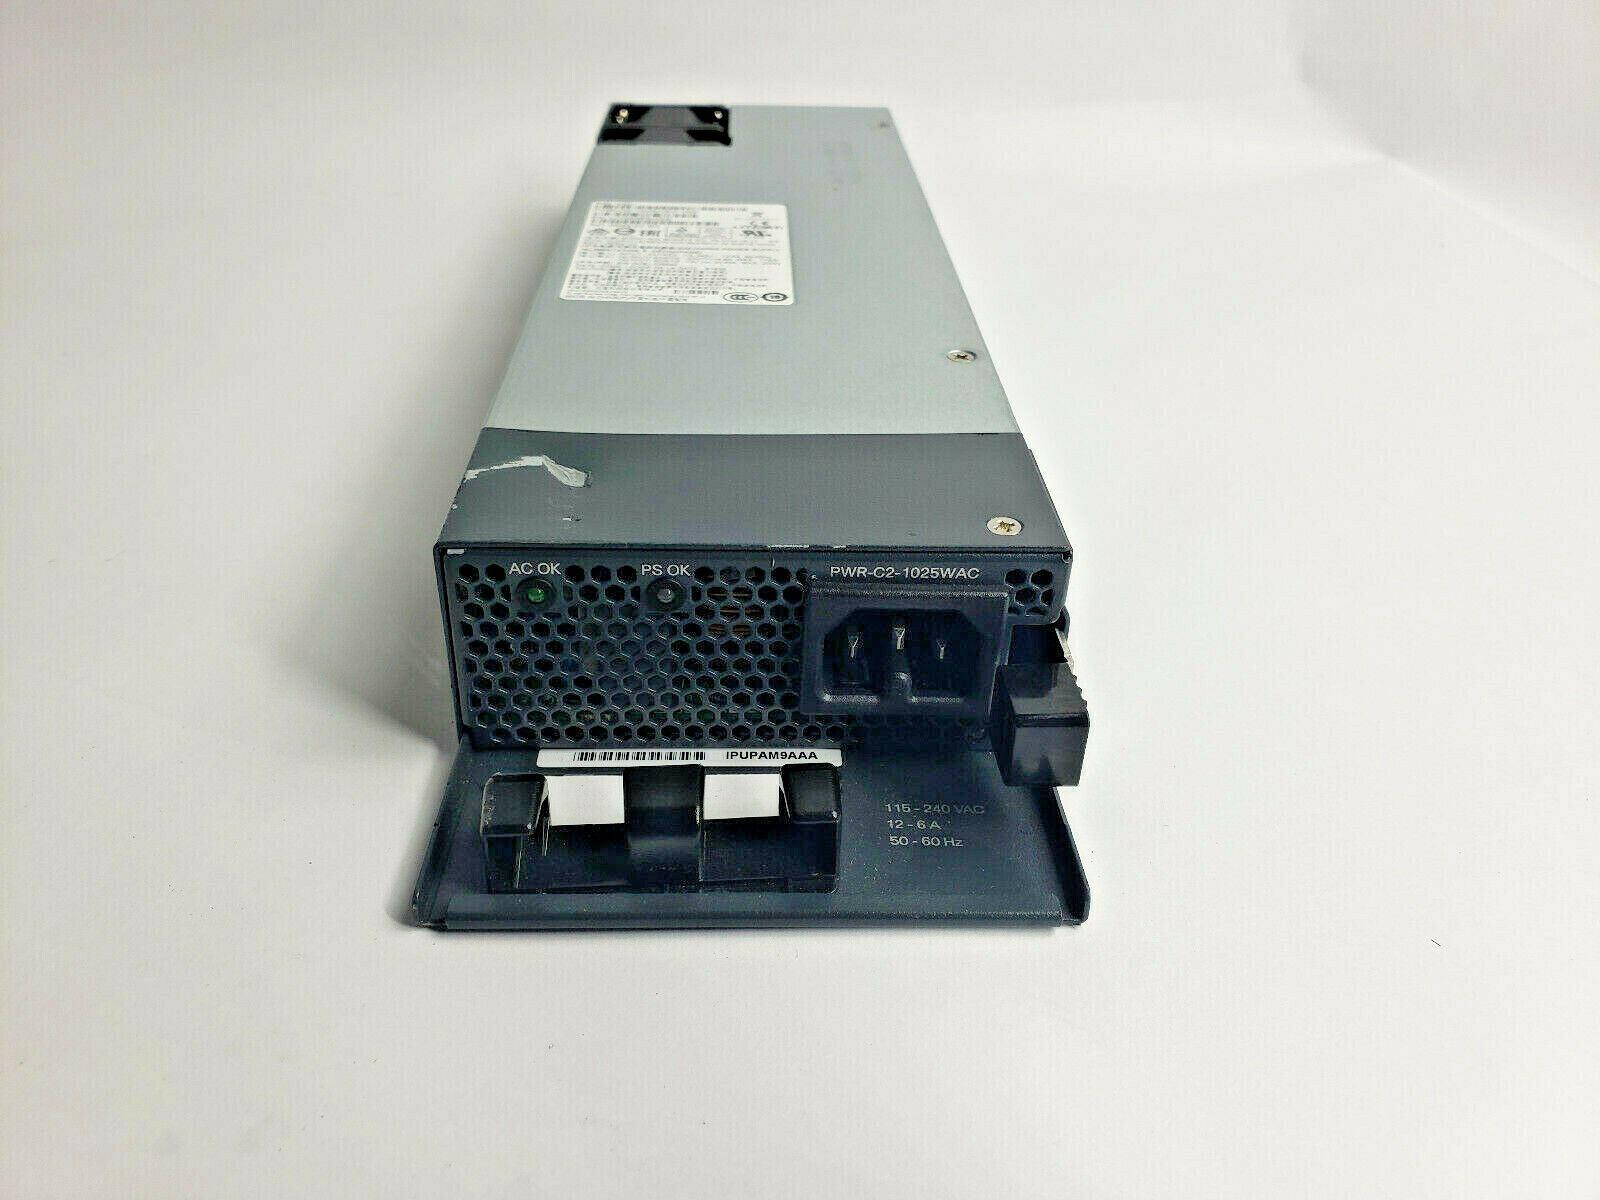 341 0533 02 DPS 1025AB PA 2102 1 LF pwr c2 1025wac cisco pwr c2 1025wac 1025 watt ac power supply for cisco catalyst 2960 x